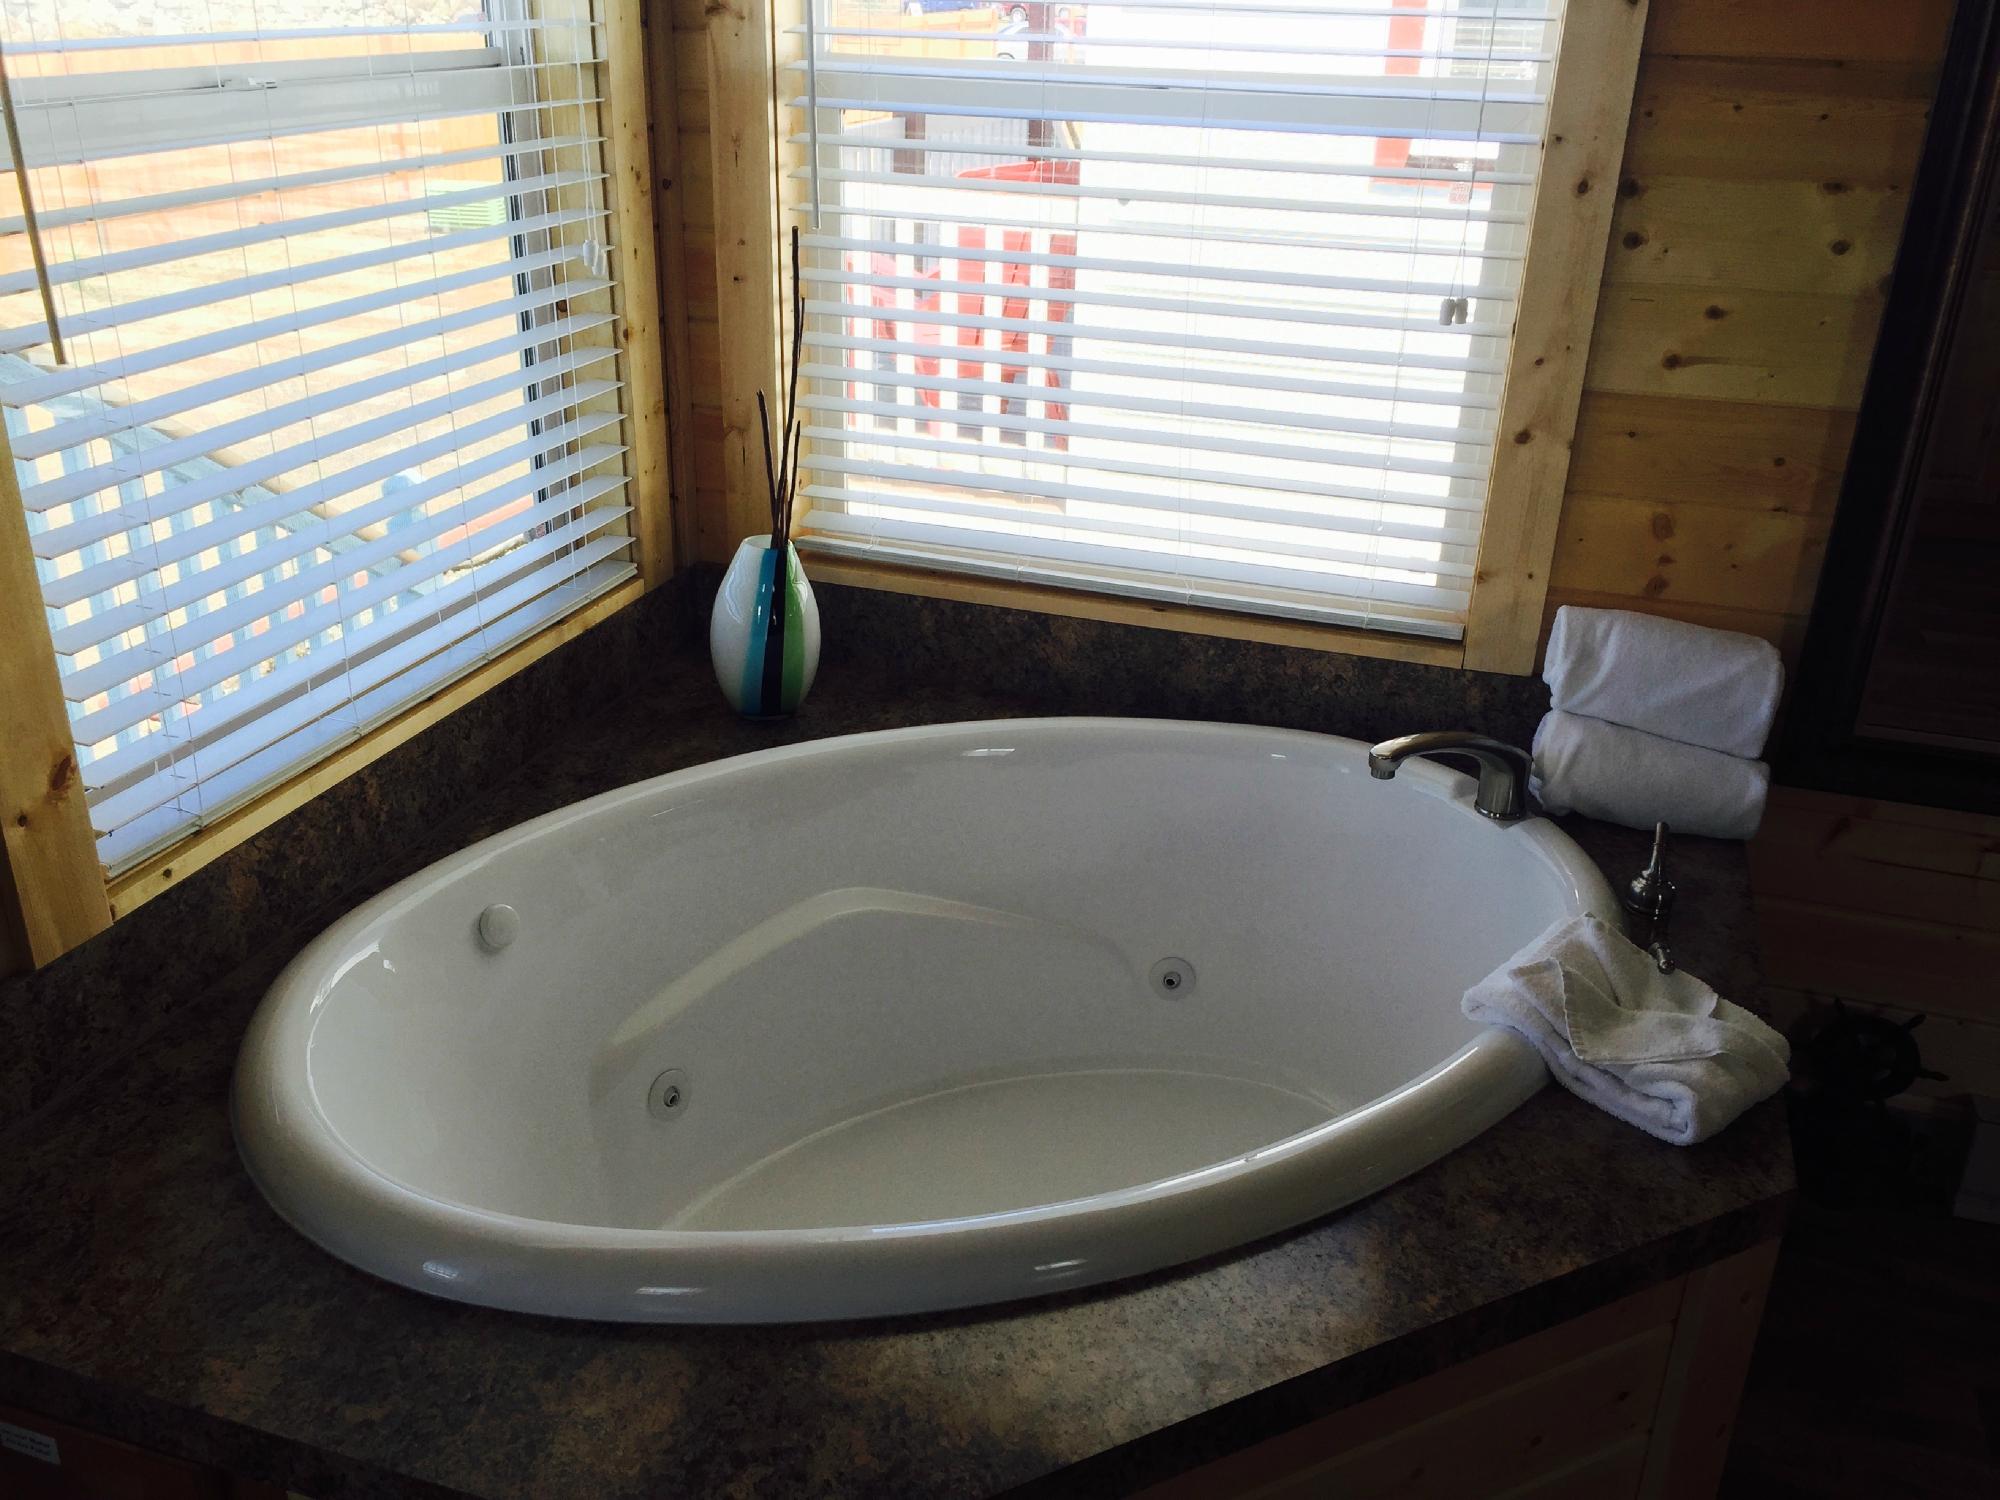  WEST COAST WASHINGTON STATE COTTAGES WITH HOT TUBS